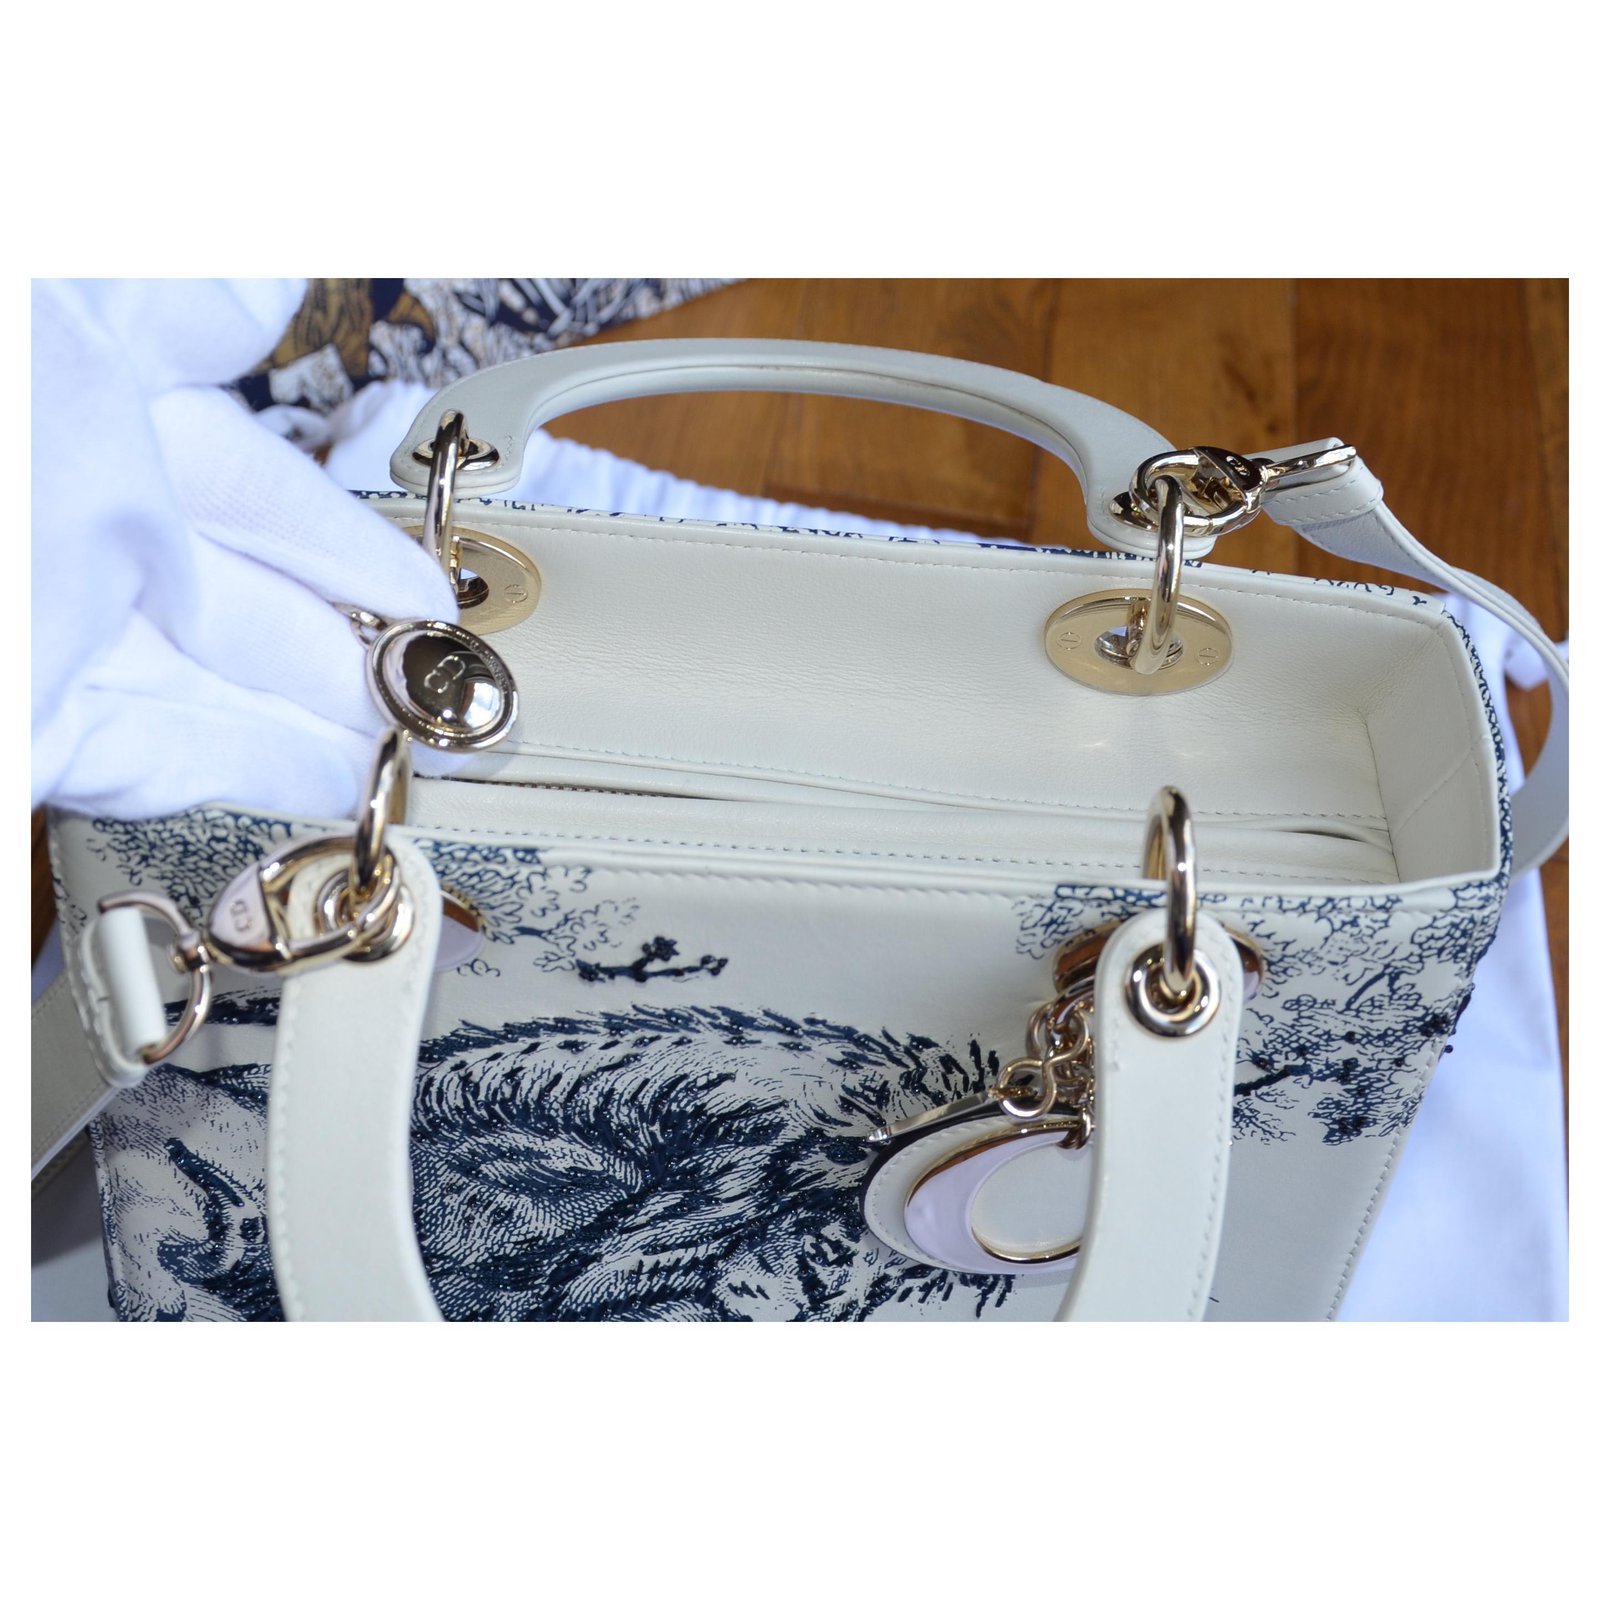 Christian Dior Lady Dior bag with Toile de Jouy motif White Golden